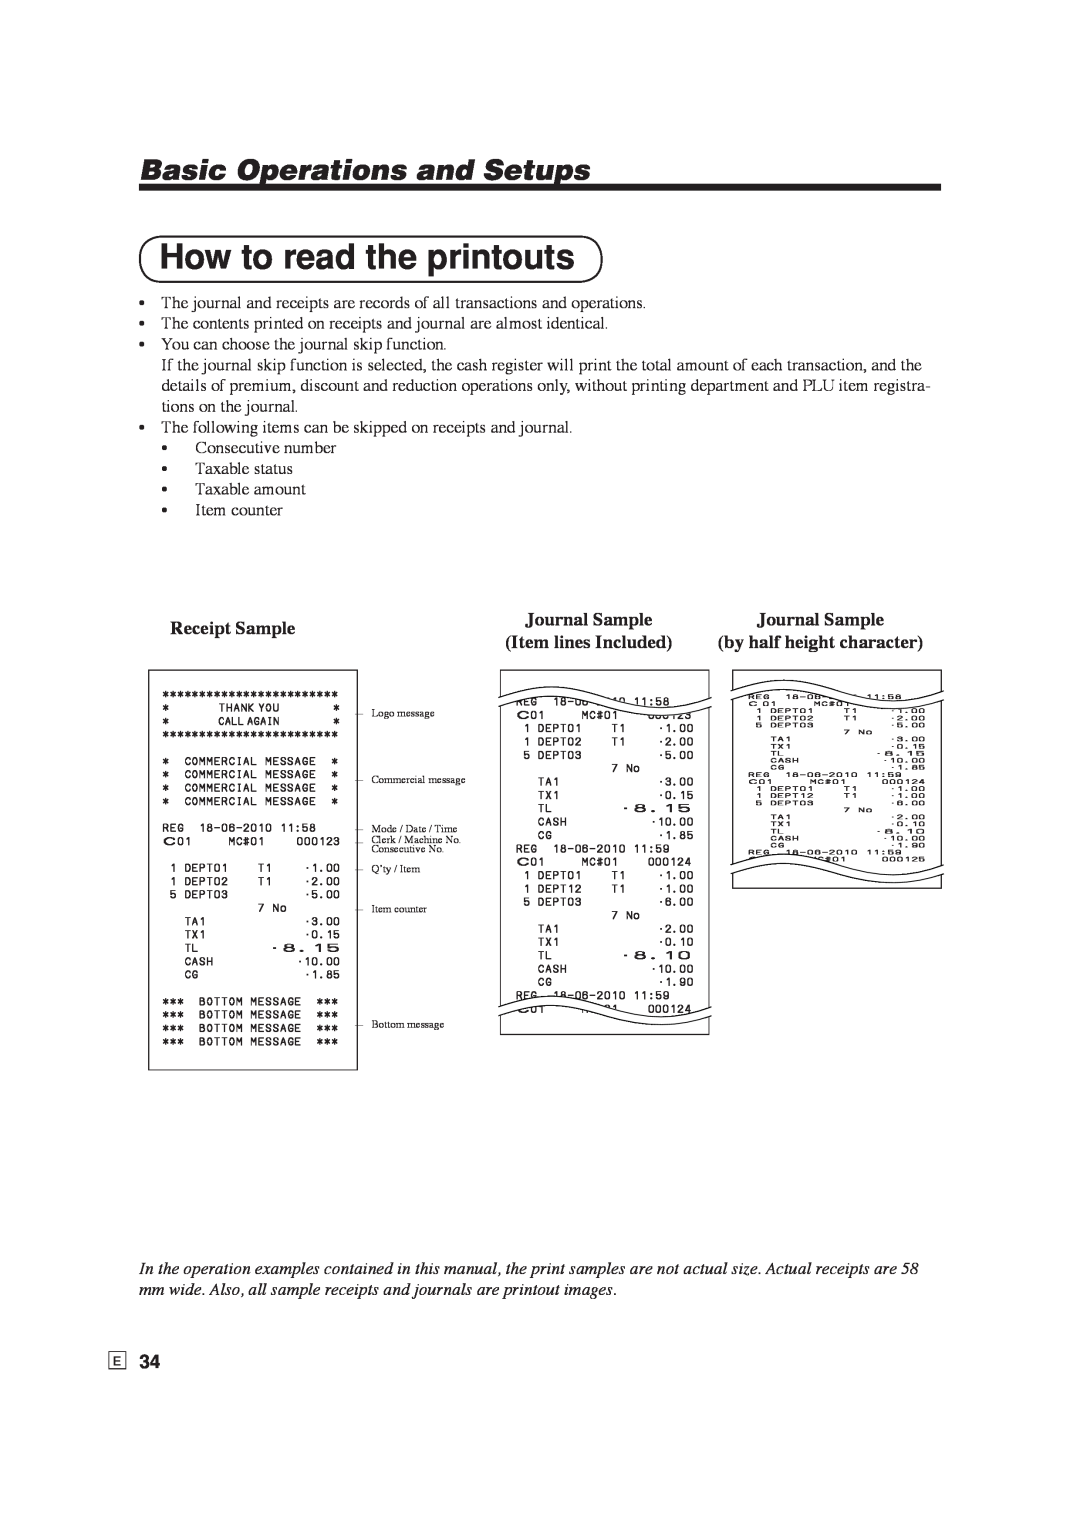 Casio SE-S6000, SE-C6000 user manual How to read the printouts, Basic Operations and Setups, Receipt Sample 